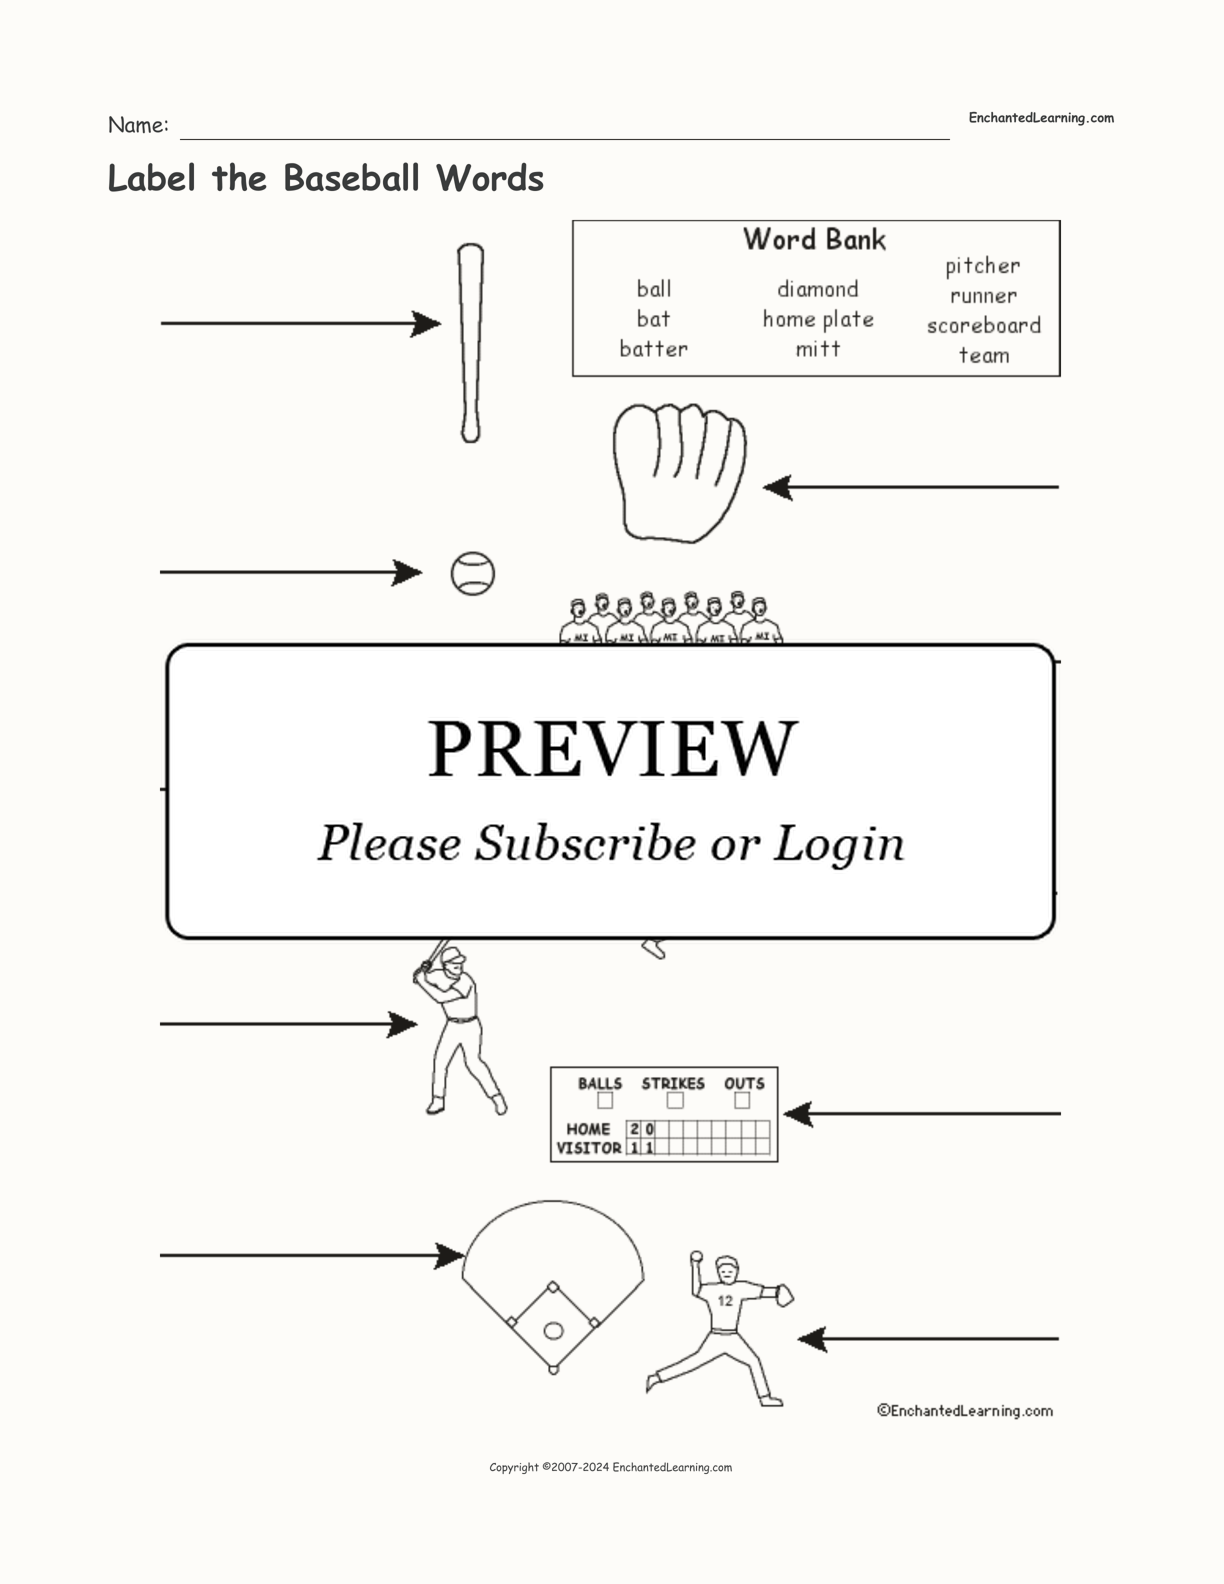 Label the Baseball Words interactive worksheet page 1